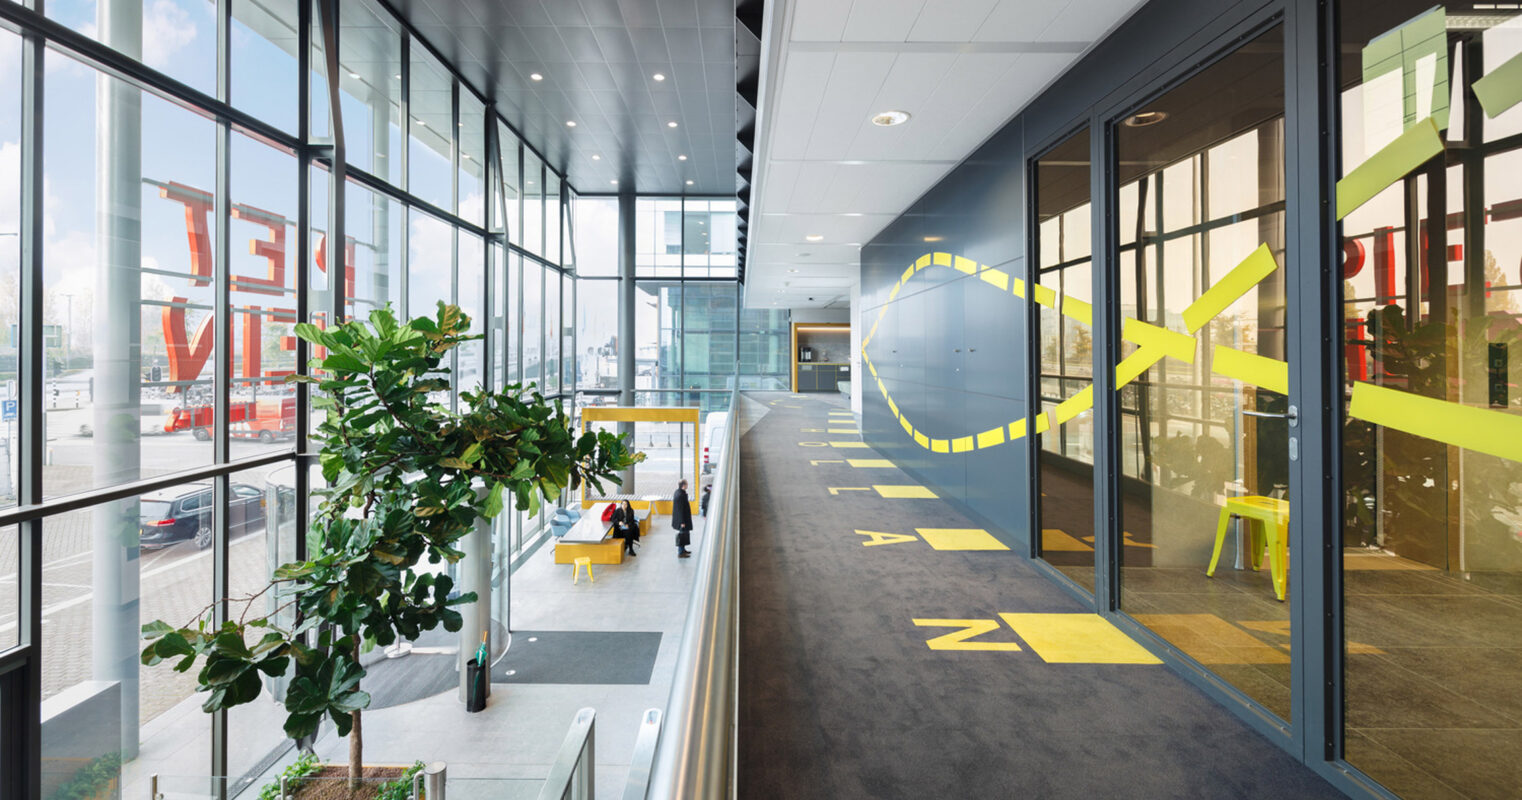 Modern office corridor with glass walls reflecting natural light, vibrant yellow accents on floor markings, and lush greenery adding a biophilic touch. Contemporary seating and sleek, minimalist architecture emphasize functionality and design.